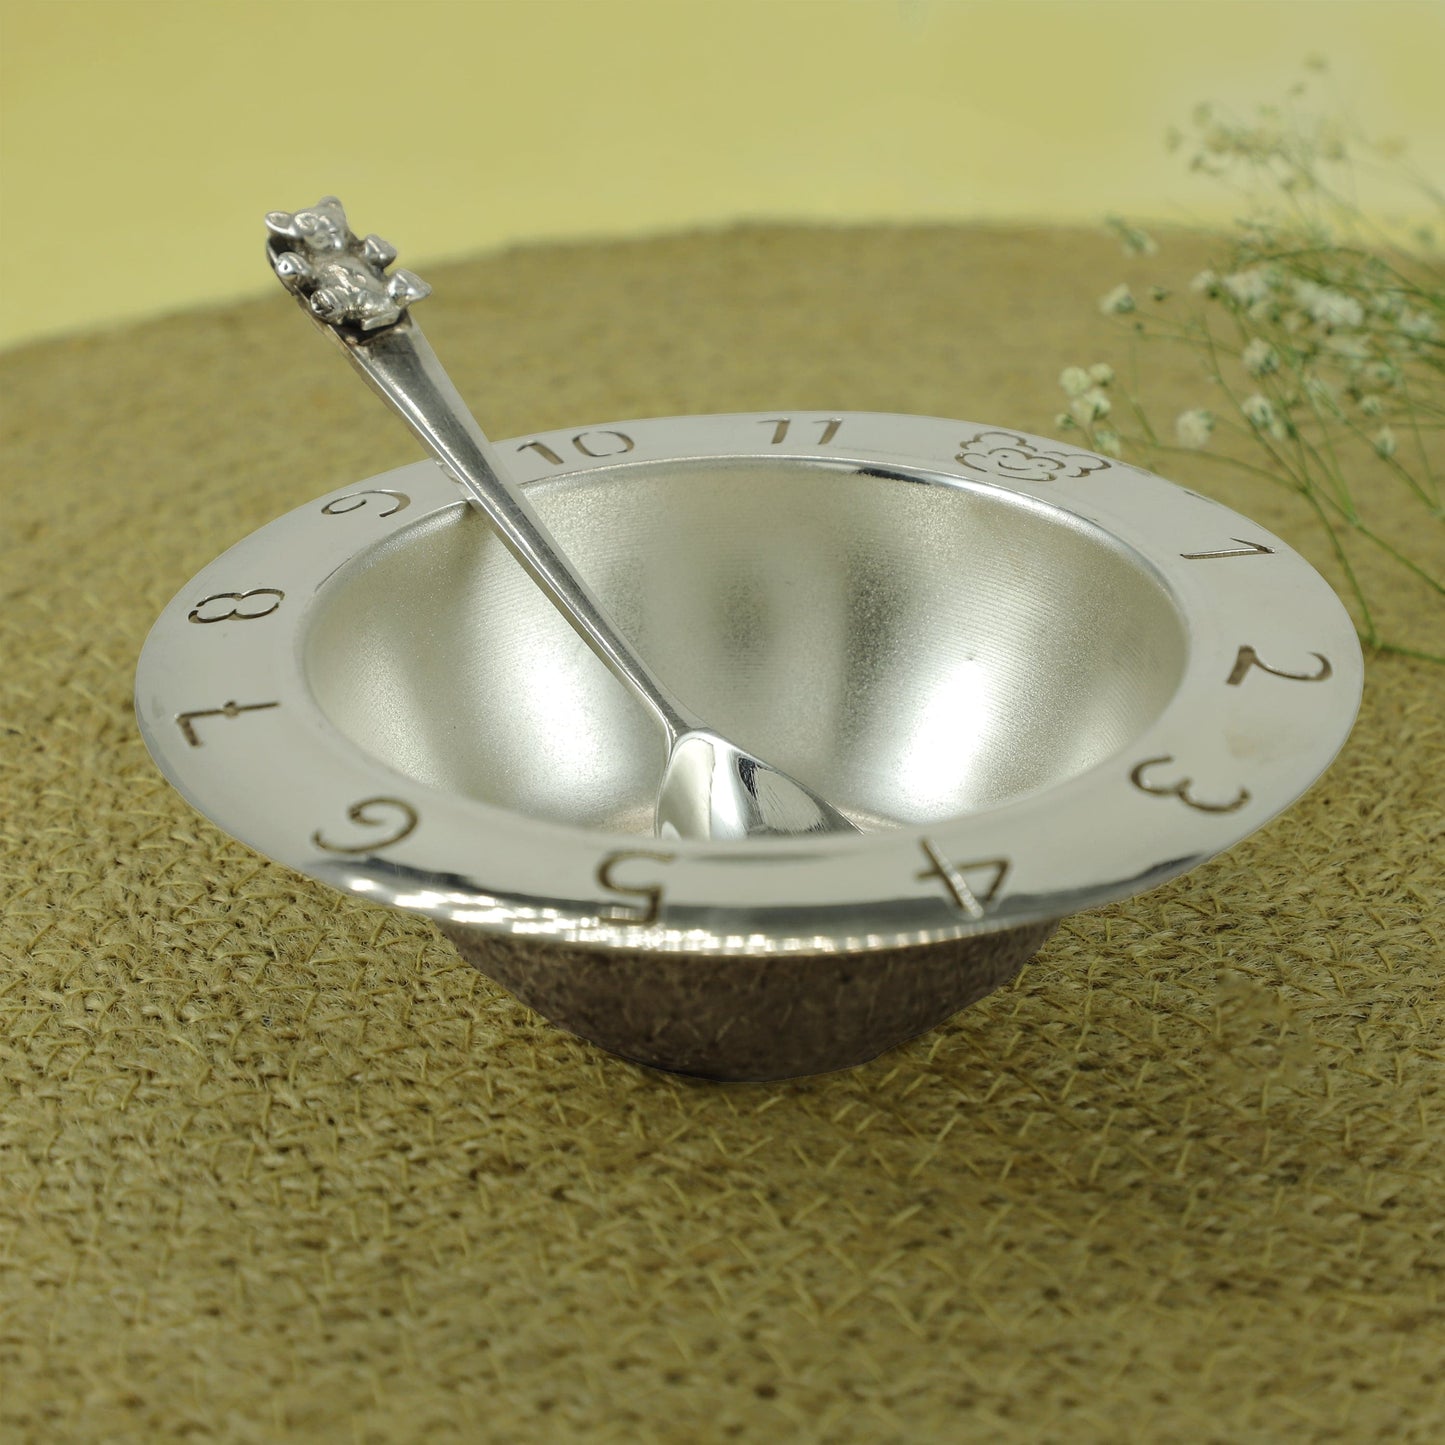 Saira Fancy Silver Bowl For Baby